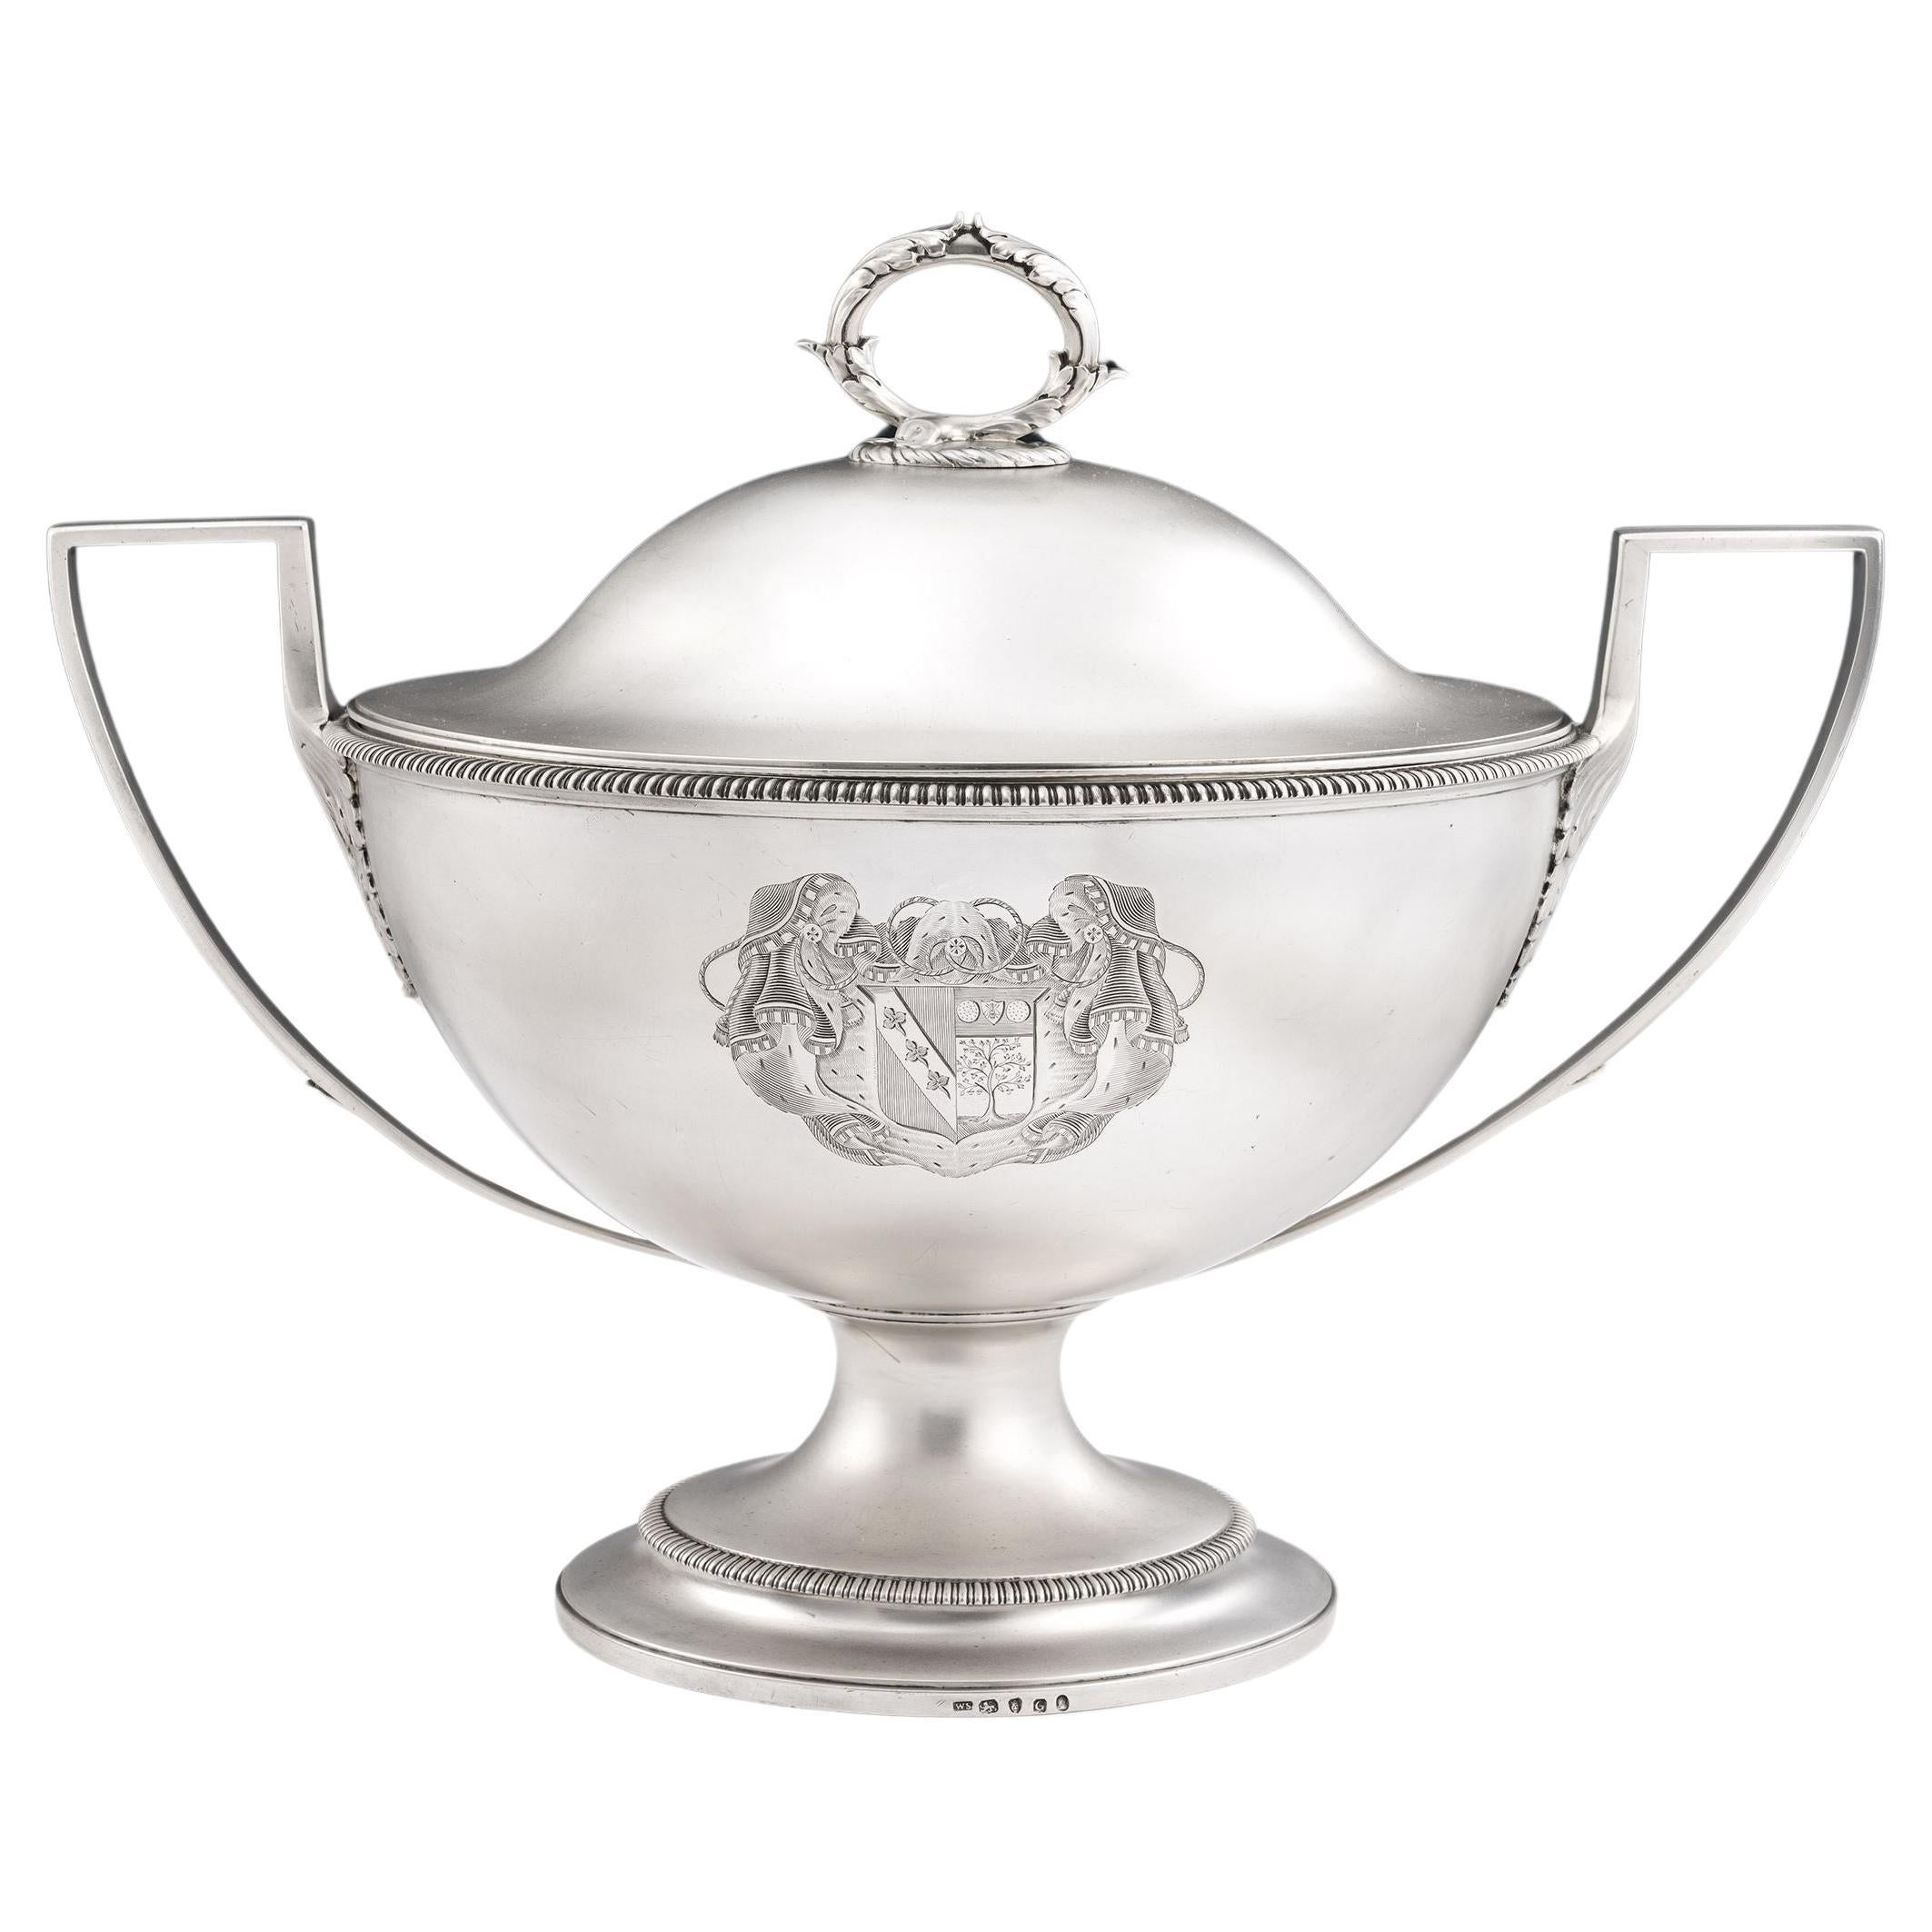 George III Soup Tureen Made in London by William Stroud, 1802